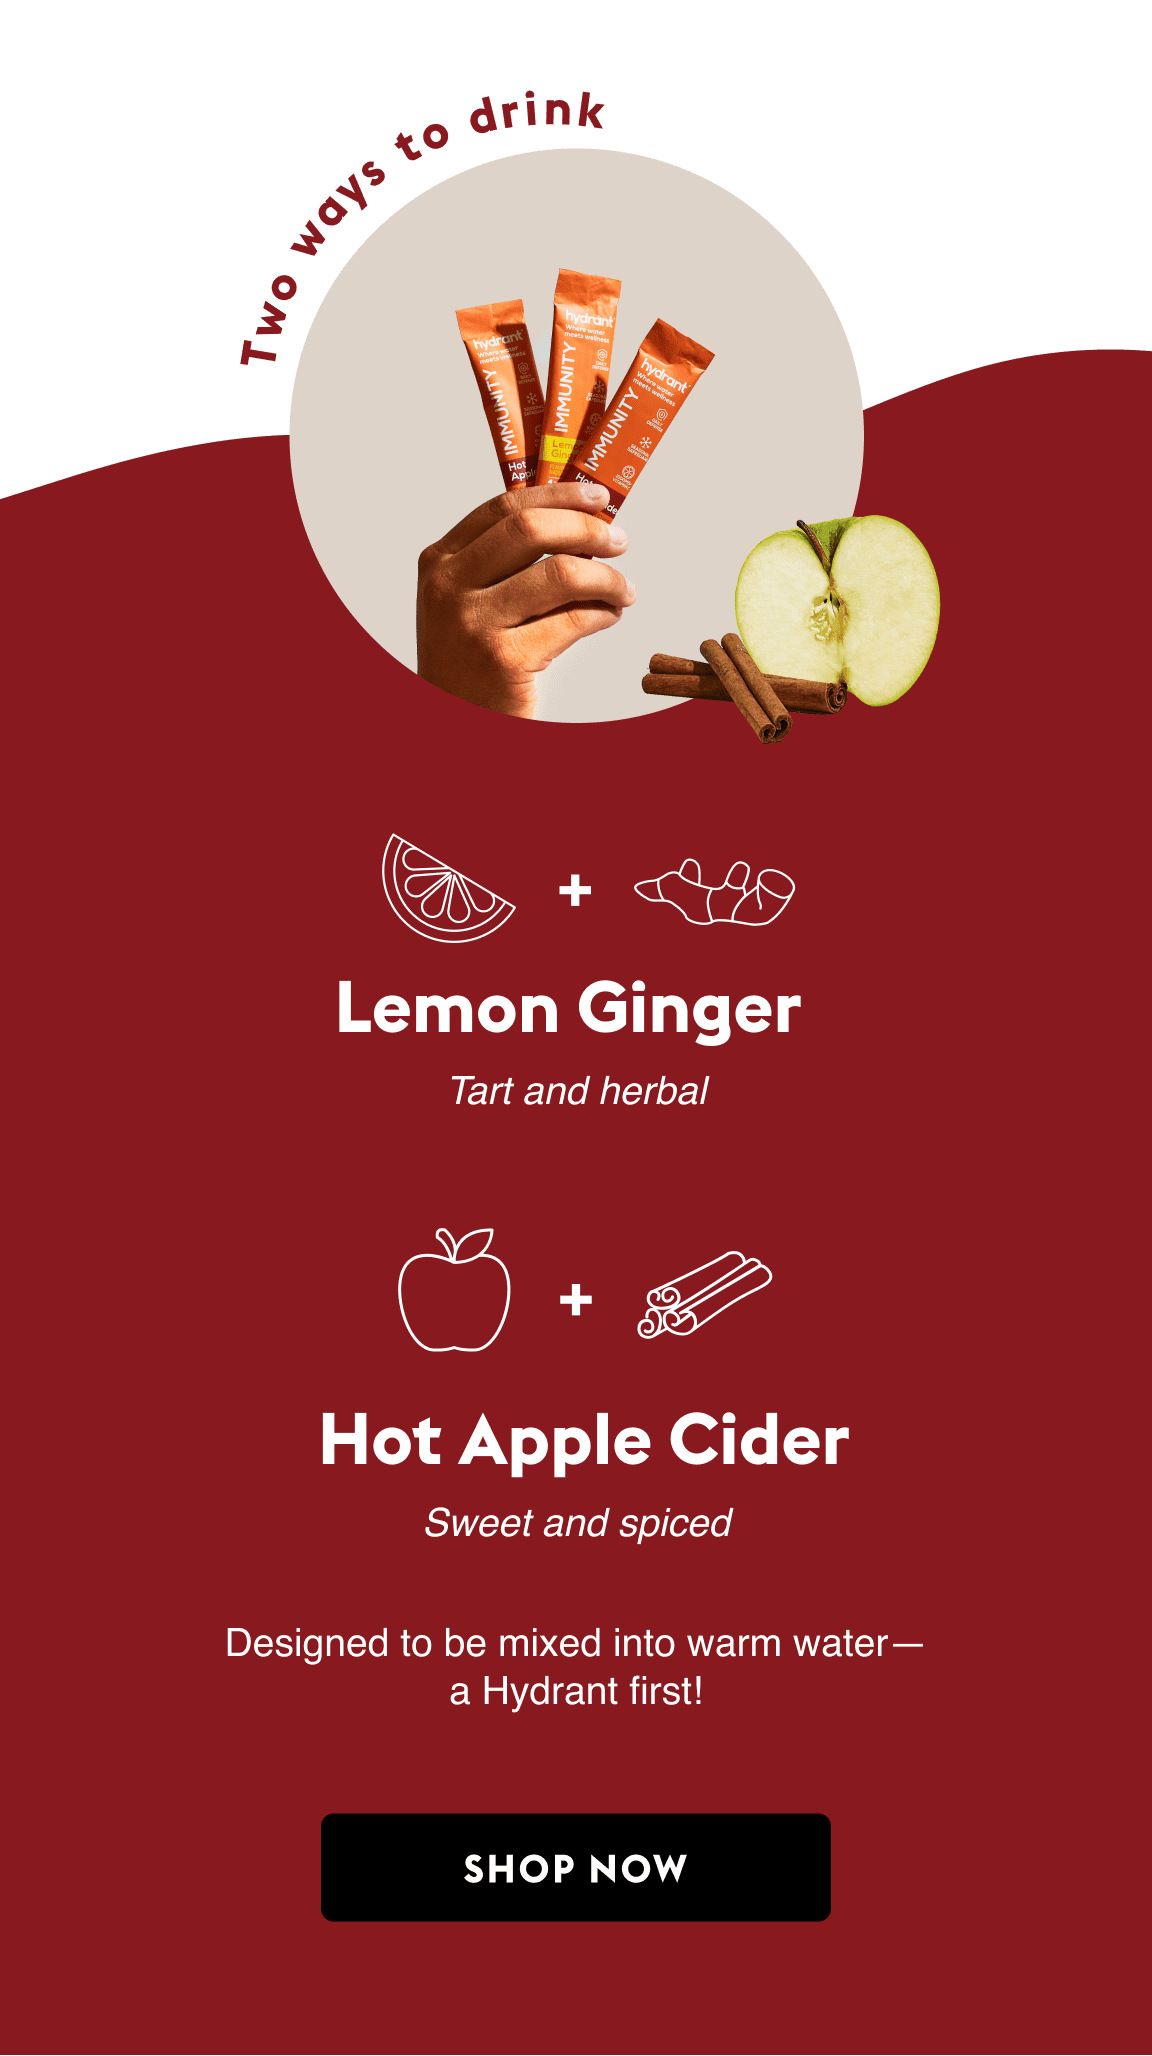 Two ways to drink. Lemon Ginger: Tart and herbal. or Apple Cider: Sweet and spiced